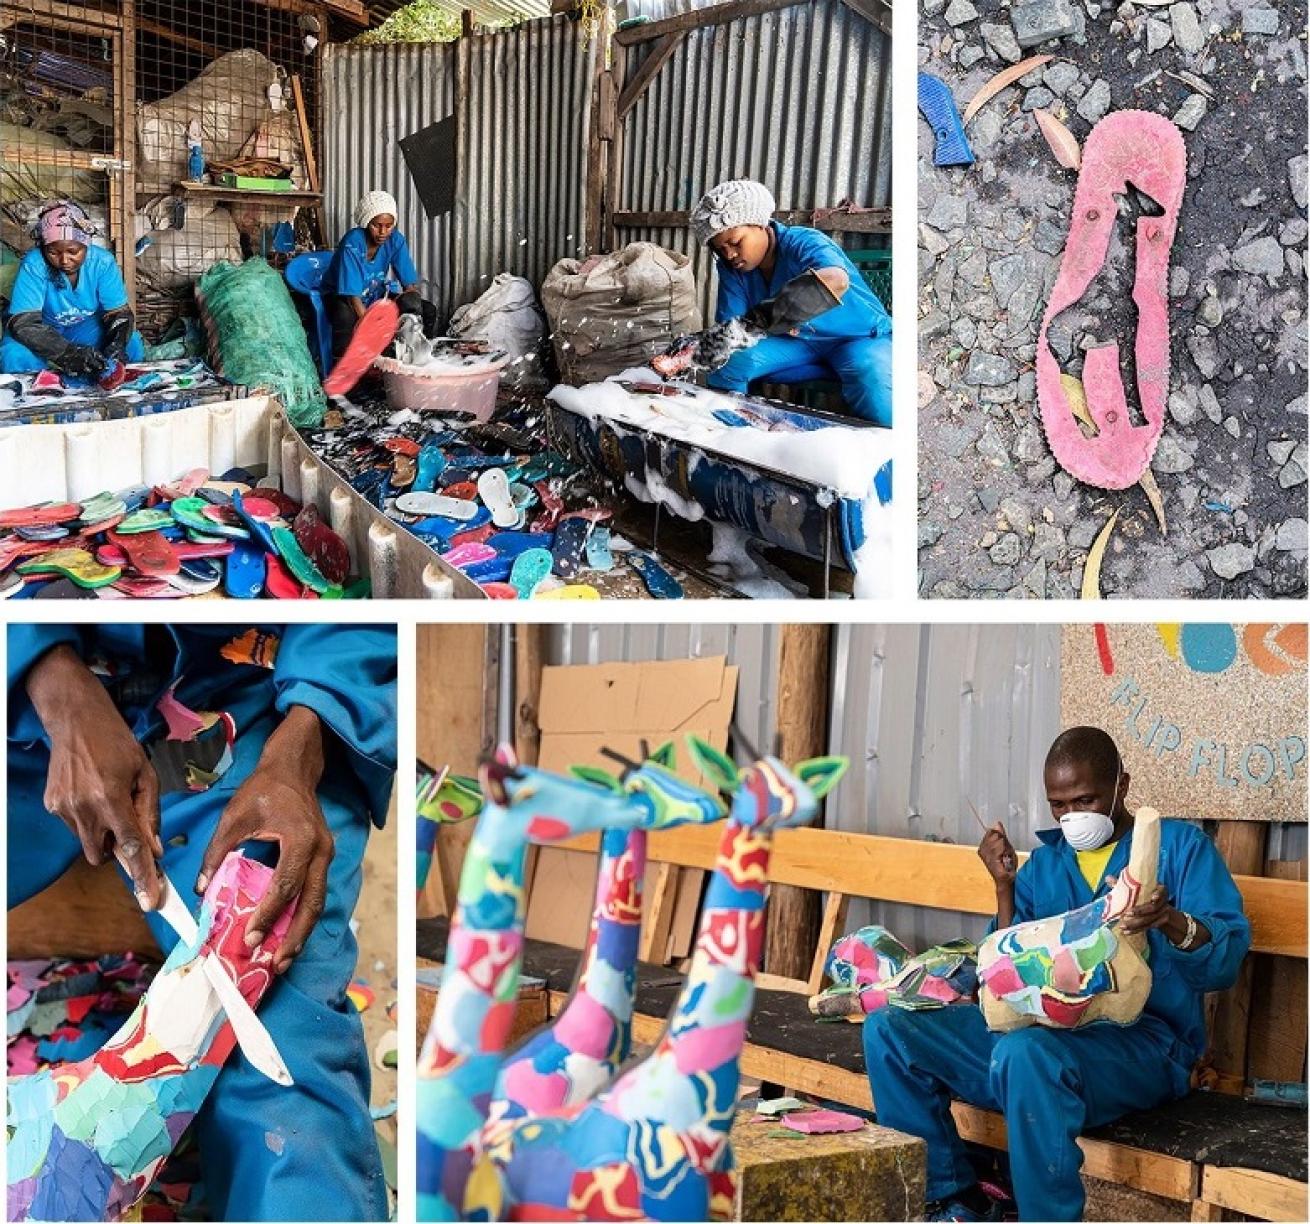 Kenyan artists turn blocks made from flip-flops that washed onto the beach into sculptures of animals, such as giraffes. The aim is to call attention to endangered species and the prolific ocean trash